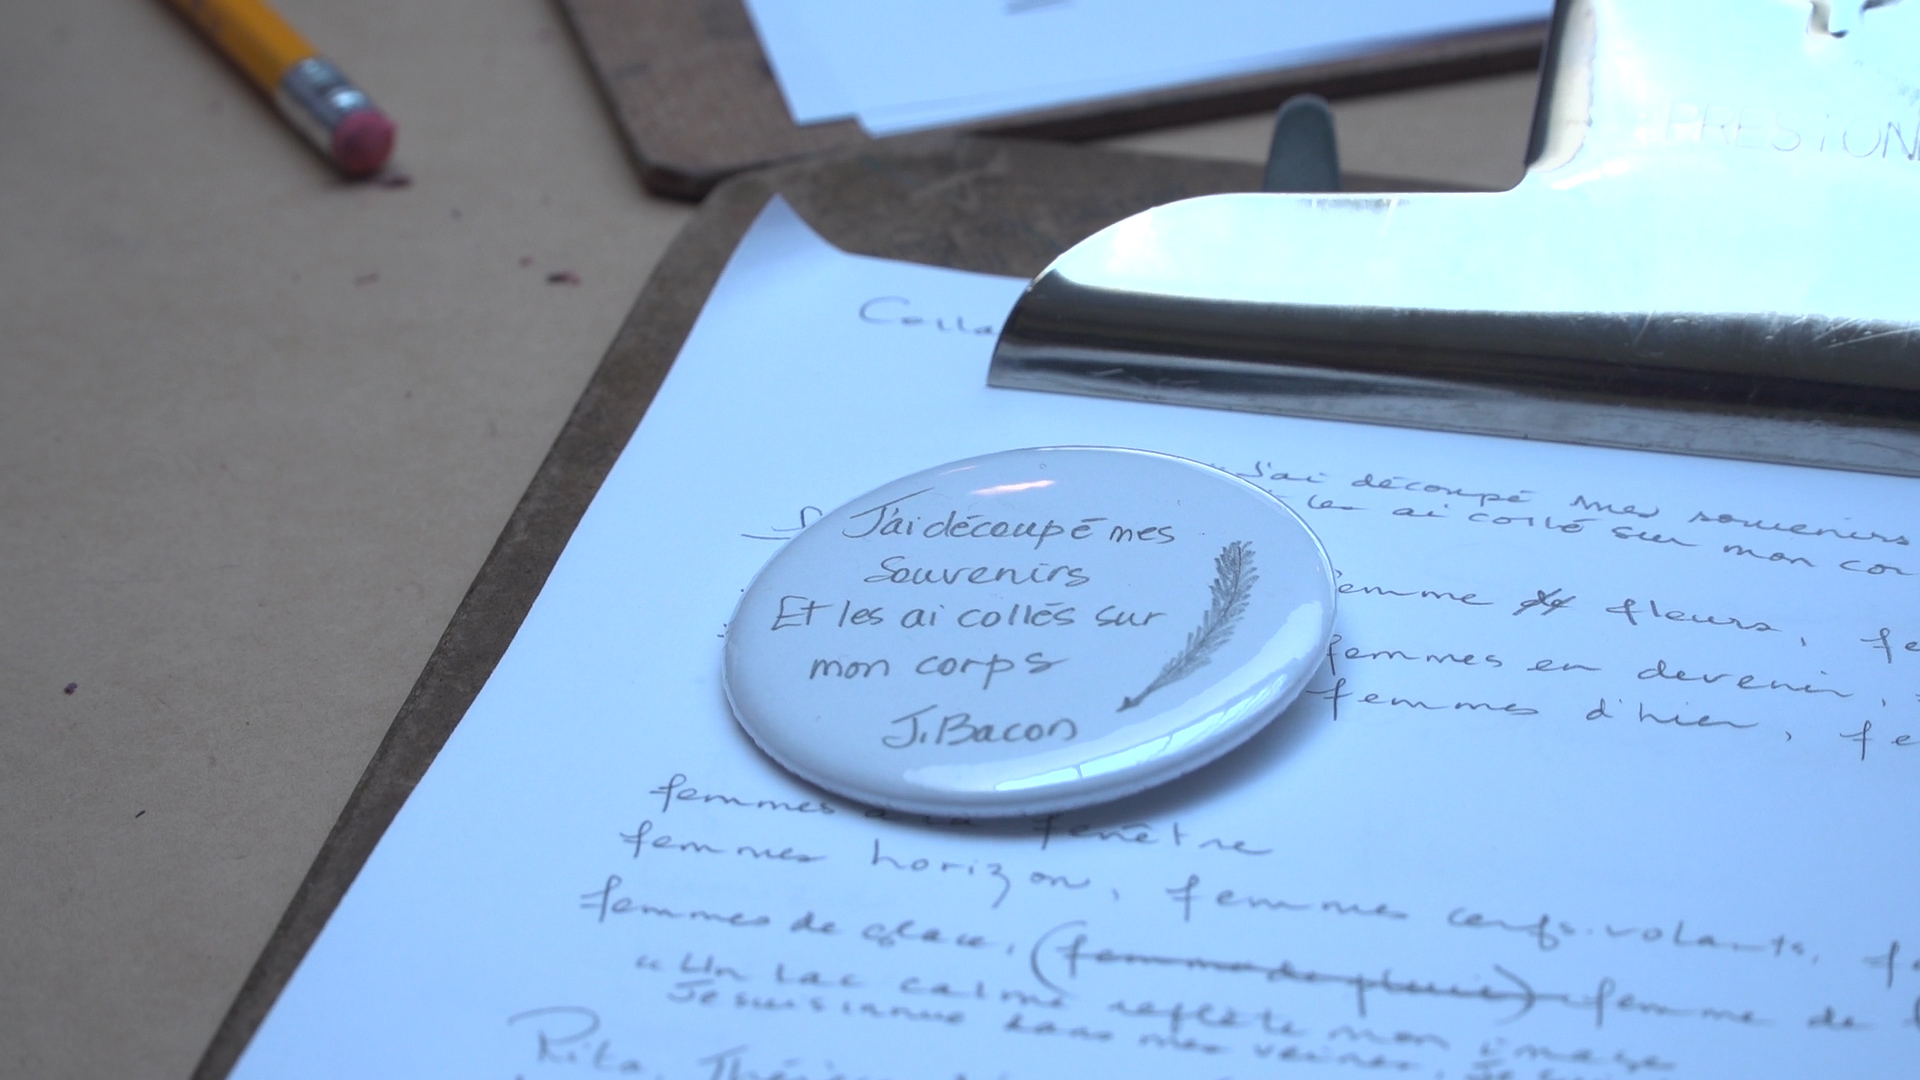 An excerpt of a poem by Joséphine Bacon on a button.